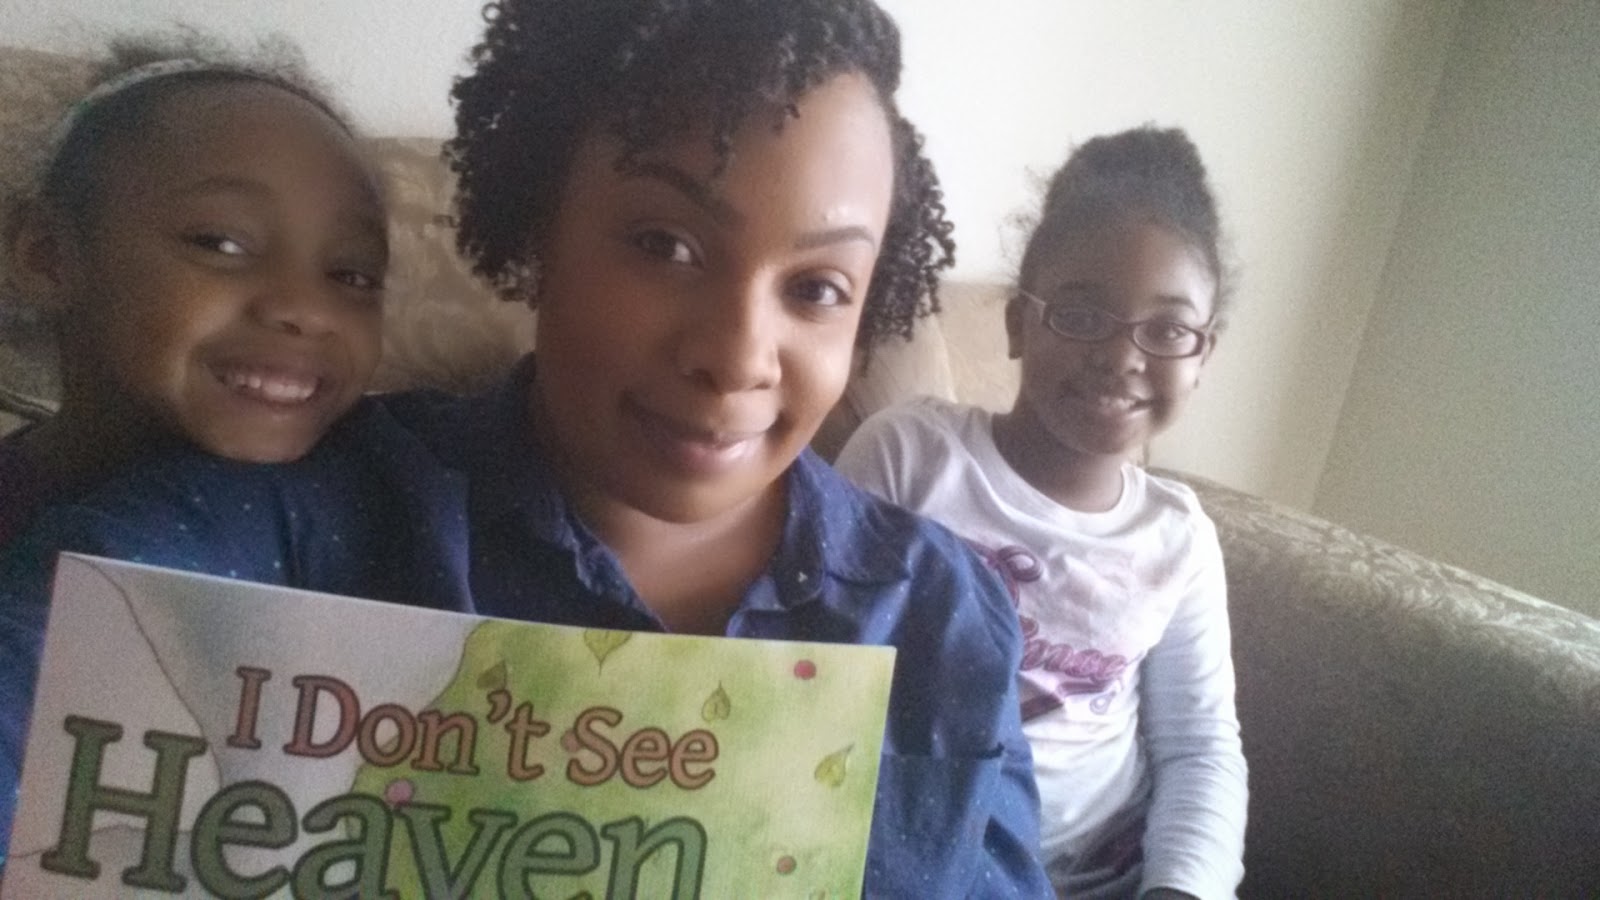 I Don't See Heaven by Jennifer Adan- A Children's Book Review